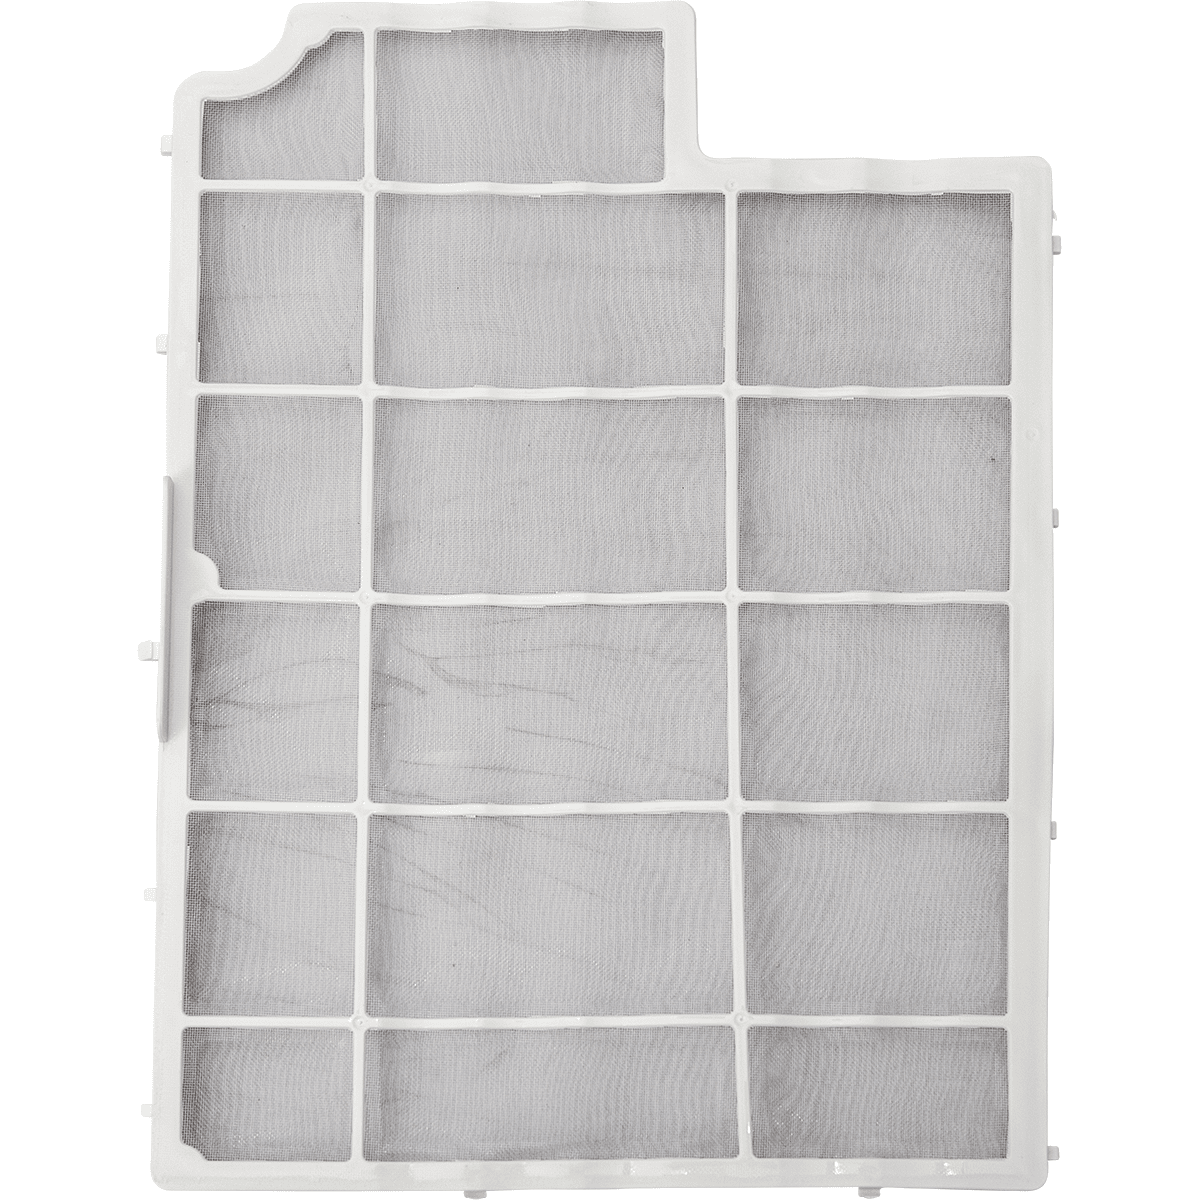 Lower Air Filter for White MN4 Series Portable AC () - Honeywell A7331-380-P-FN